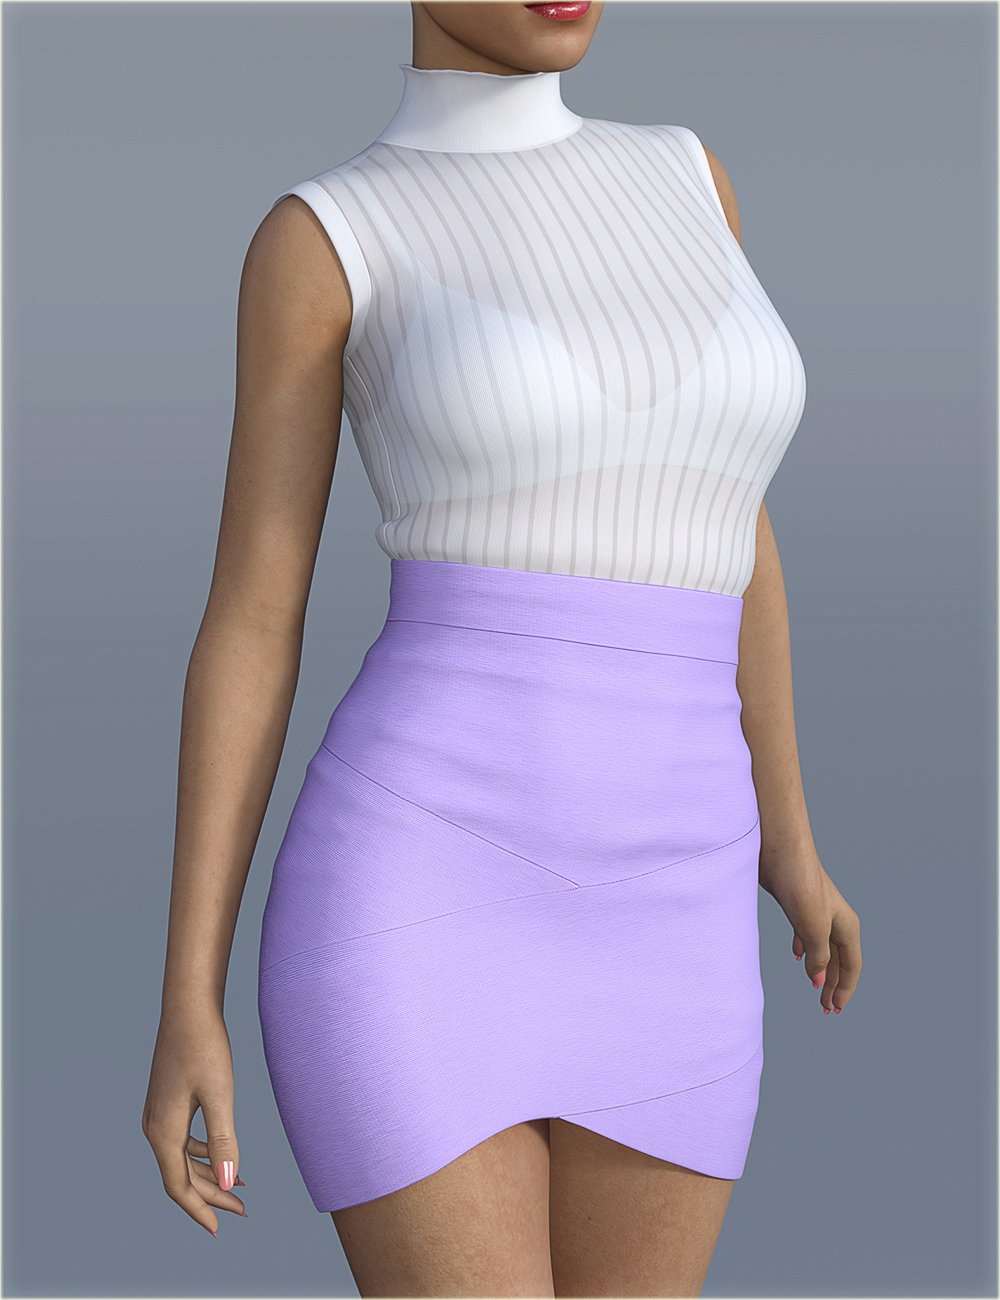 H&C Bandage Mini Skirt Outfit for Genesis 8 Female(s) by: IH Kang, 3D Models by Daz 3D